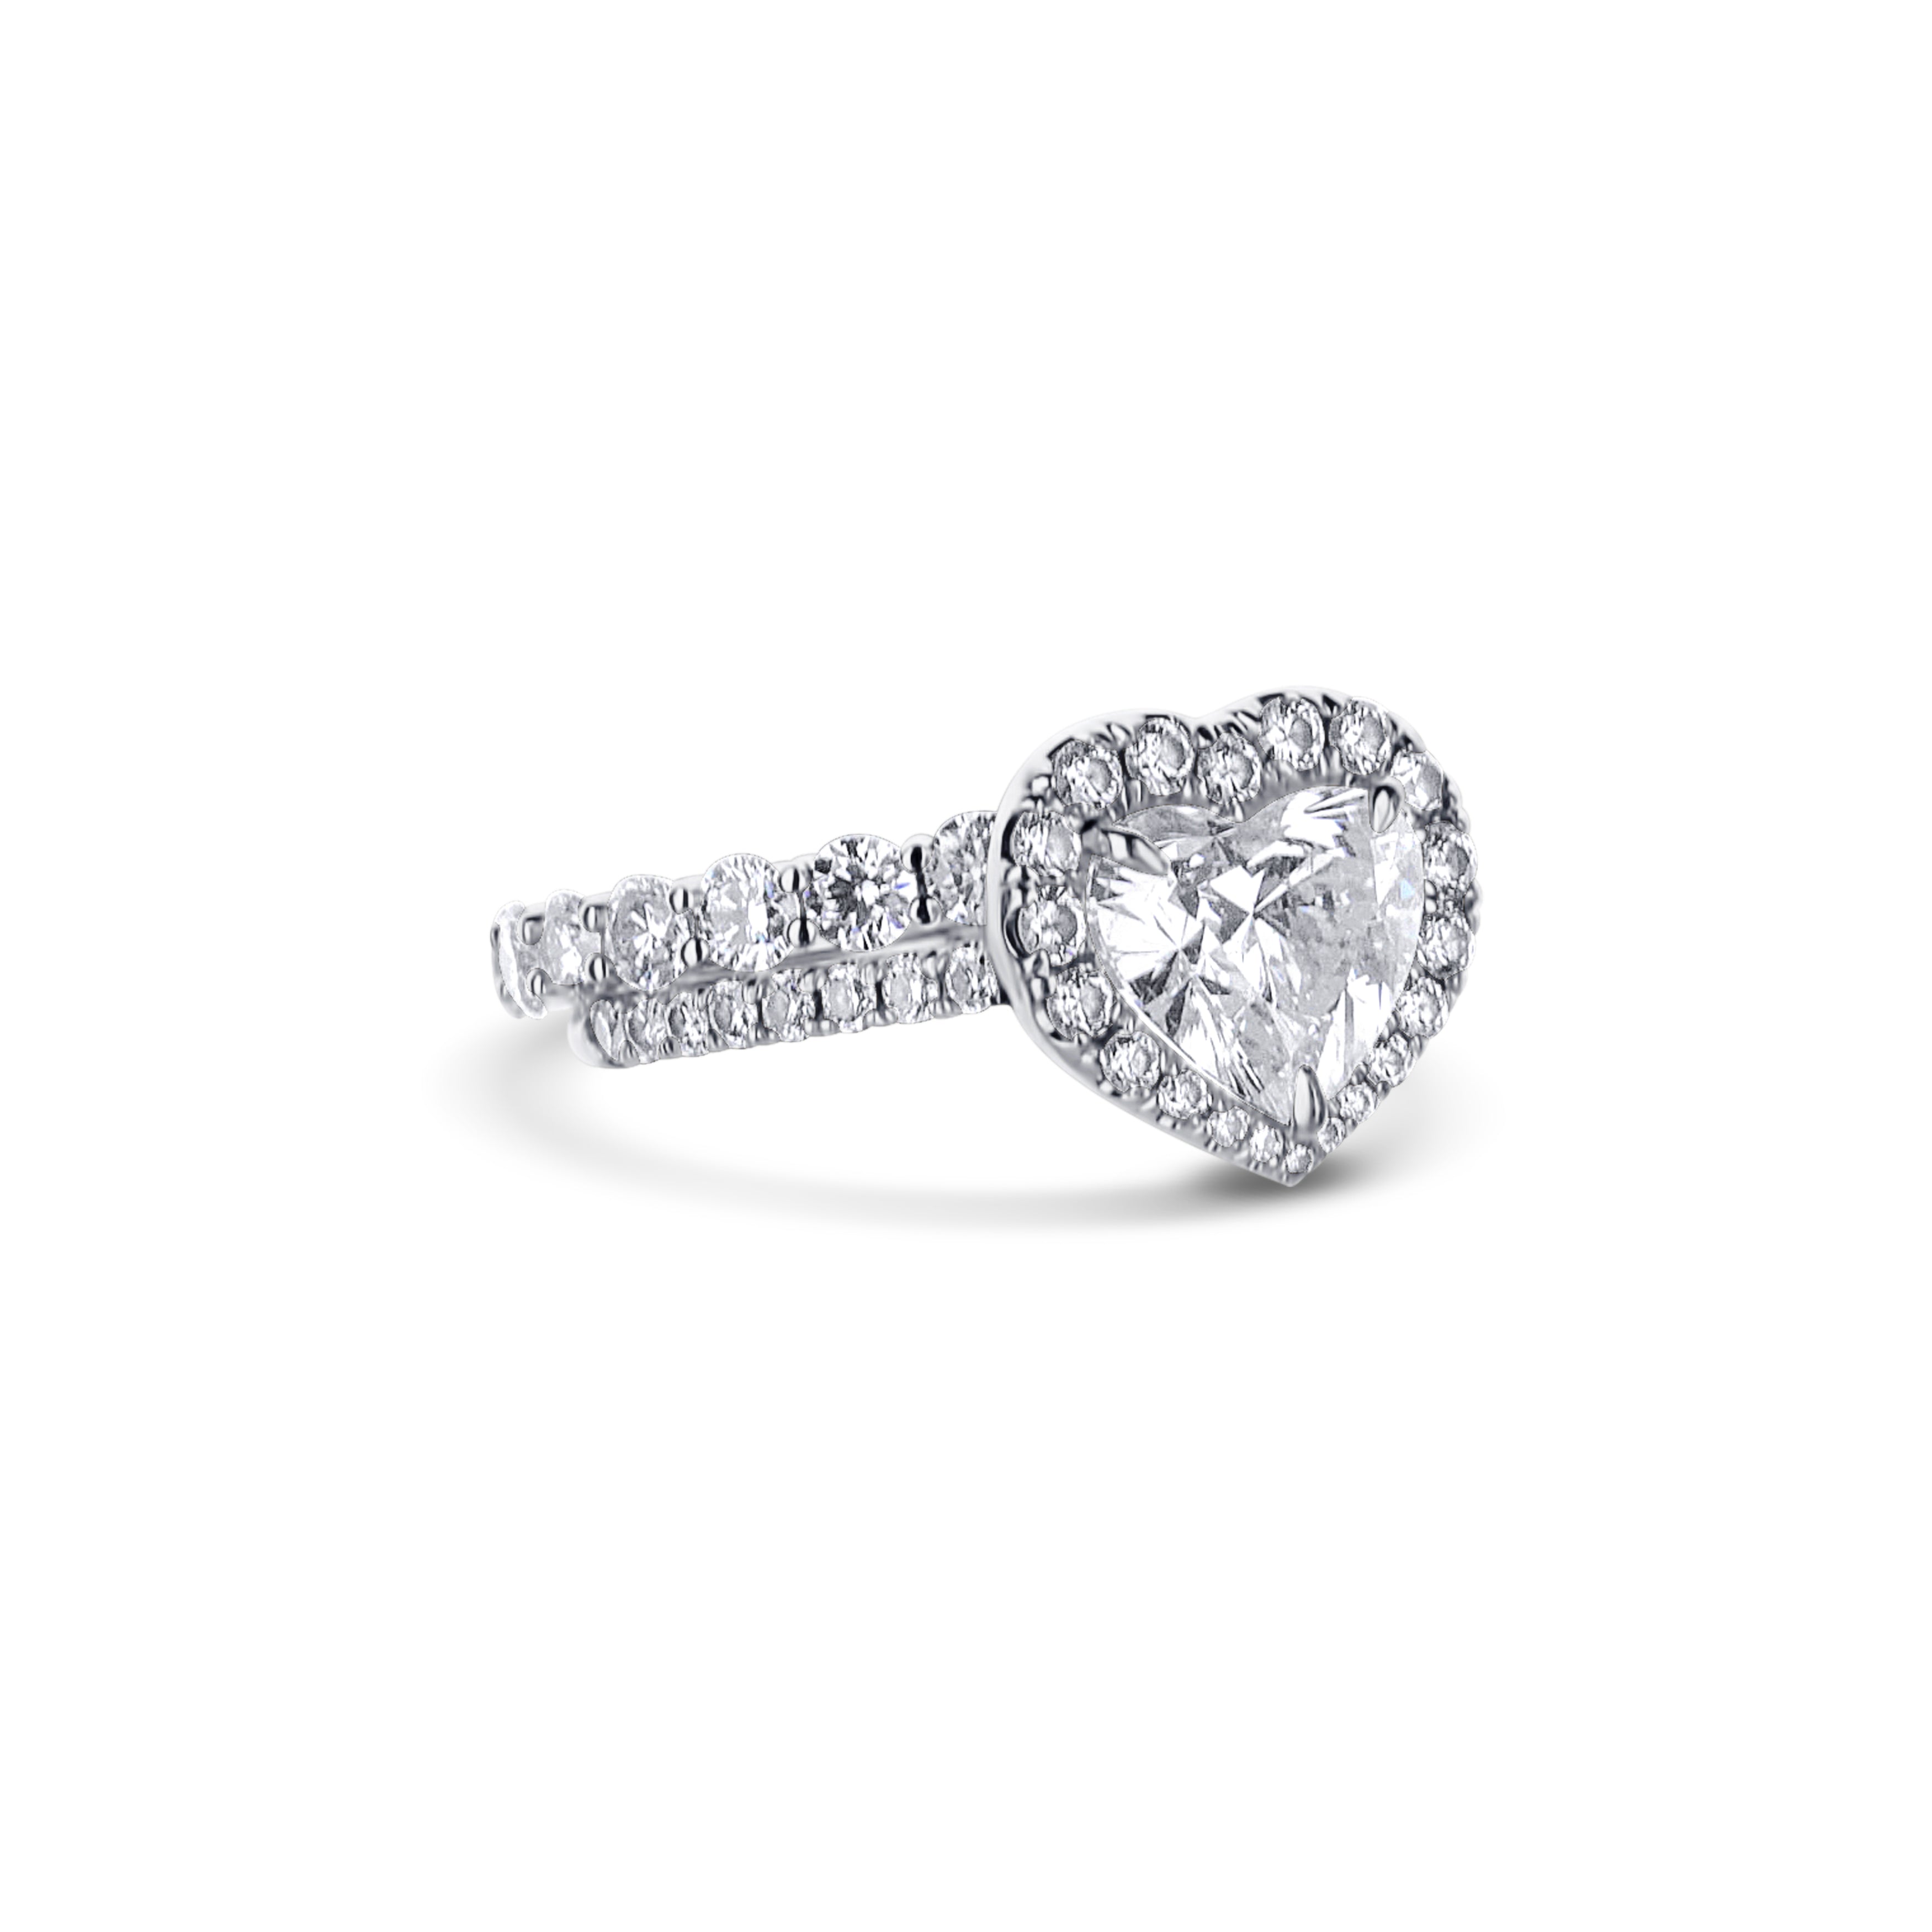 18K White Gold 2.00Ct Brilliant Cut Heart Diamond Engagement Ring With French "U" Micro Pave